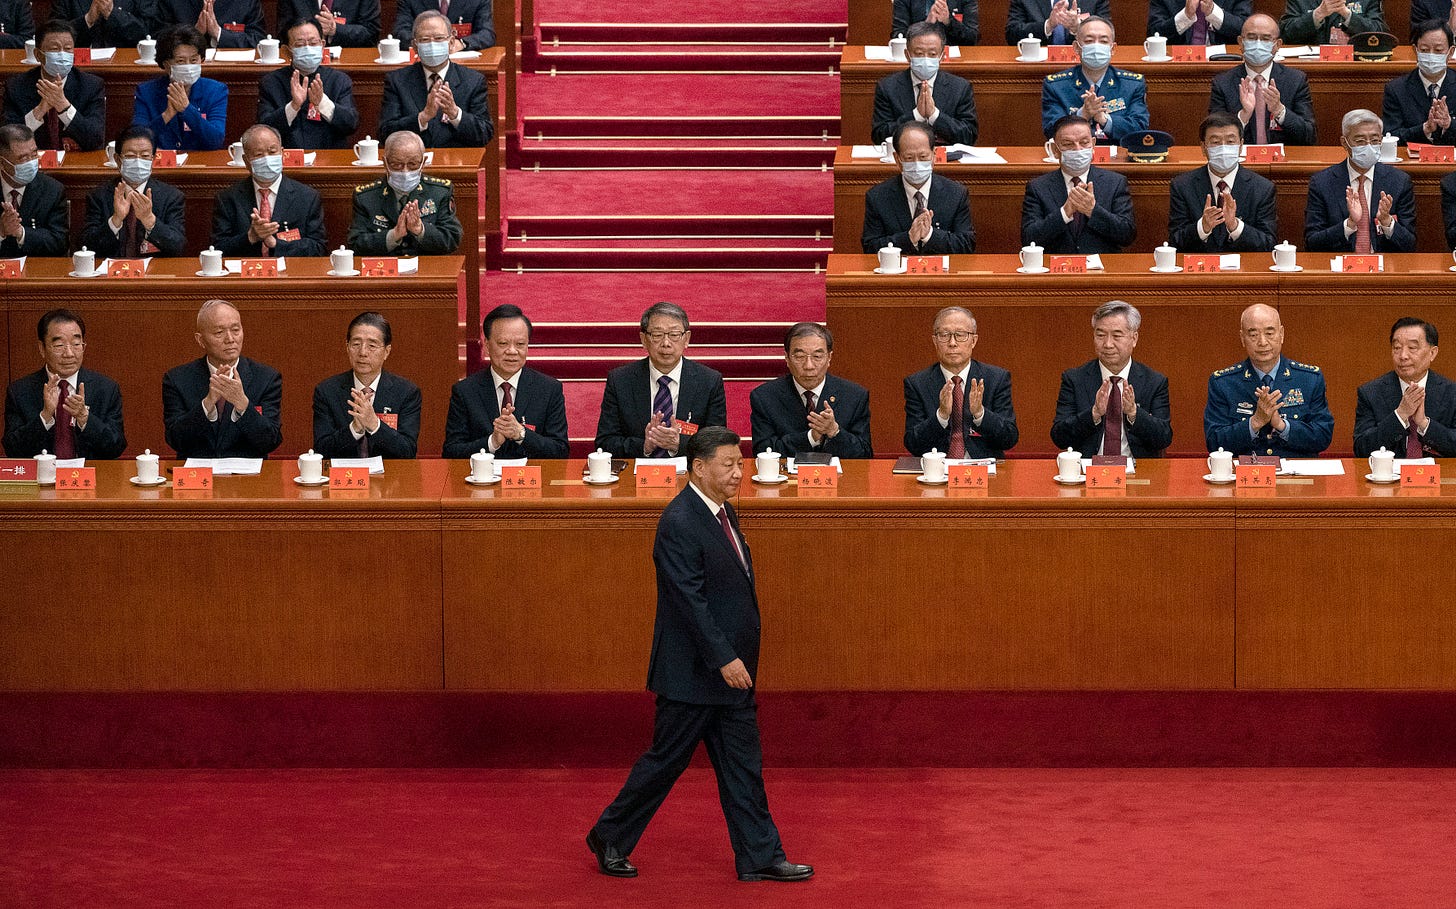 Chinese President Xi Jinping walks to the podium before his speech during the Opening Ceremony of the 20th National Congress of the Communist Party of China on October 16, 2022 in Beijing. (Photo by Kevin Frayer/Getty Images).